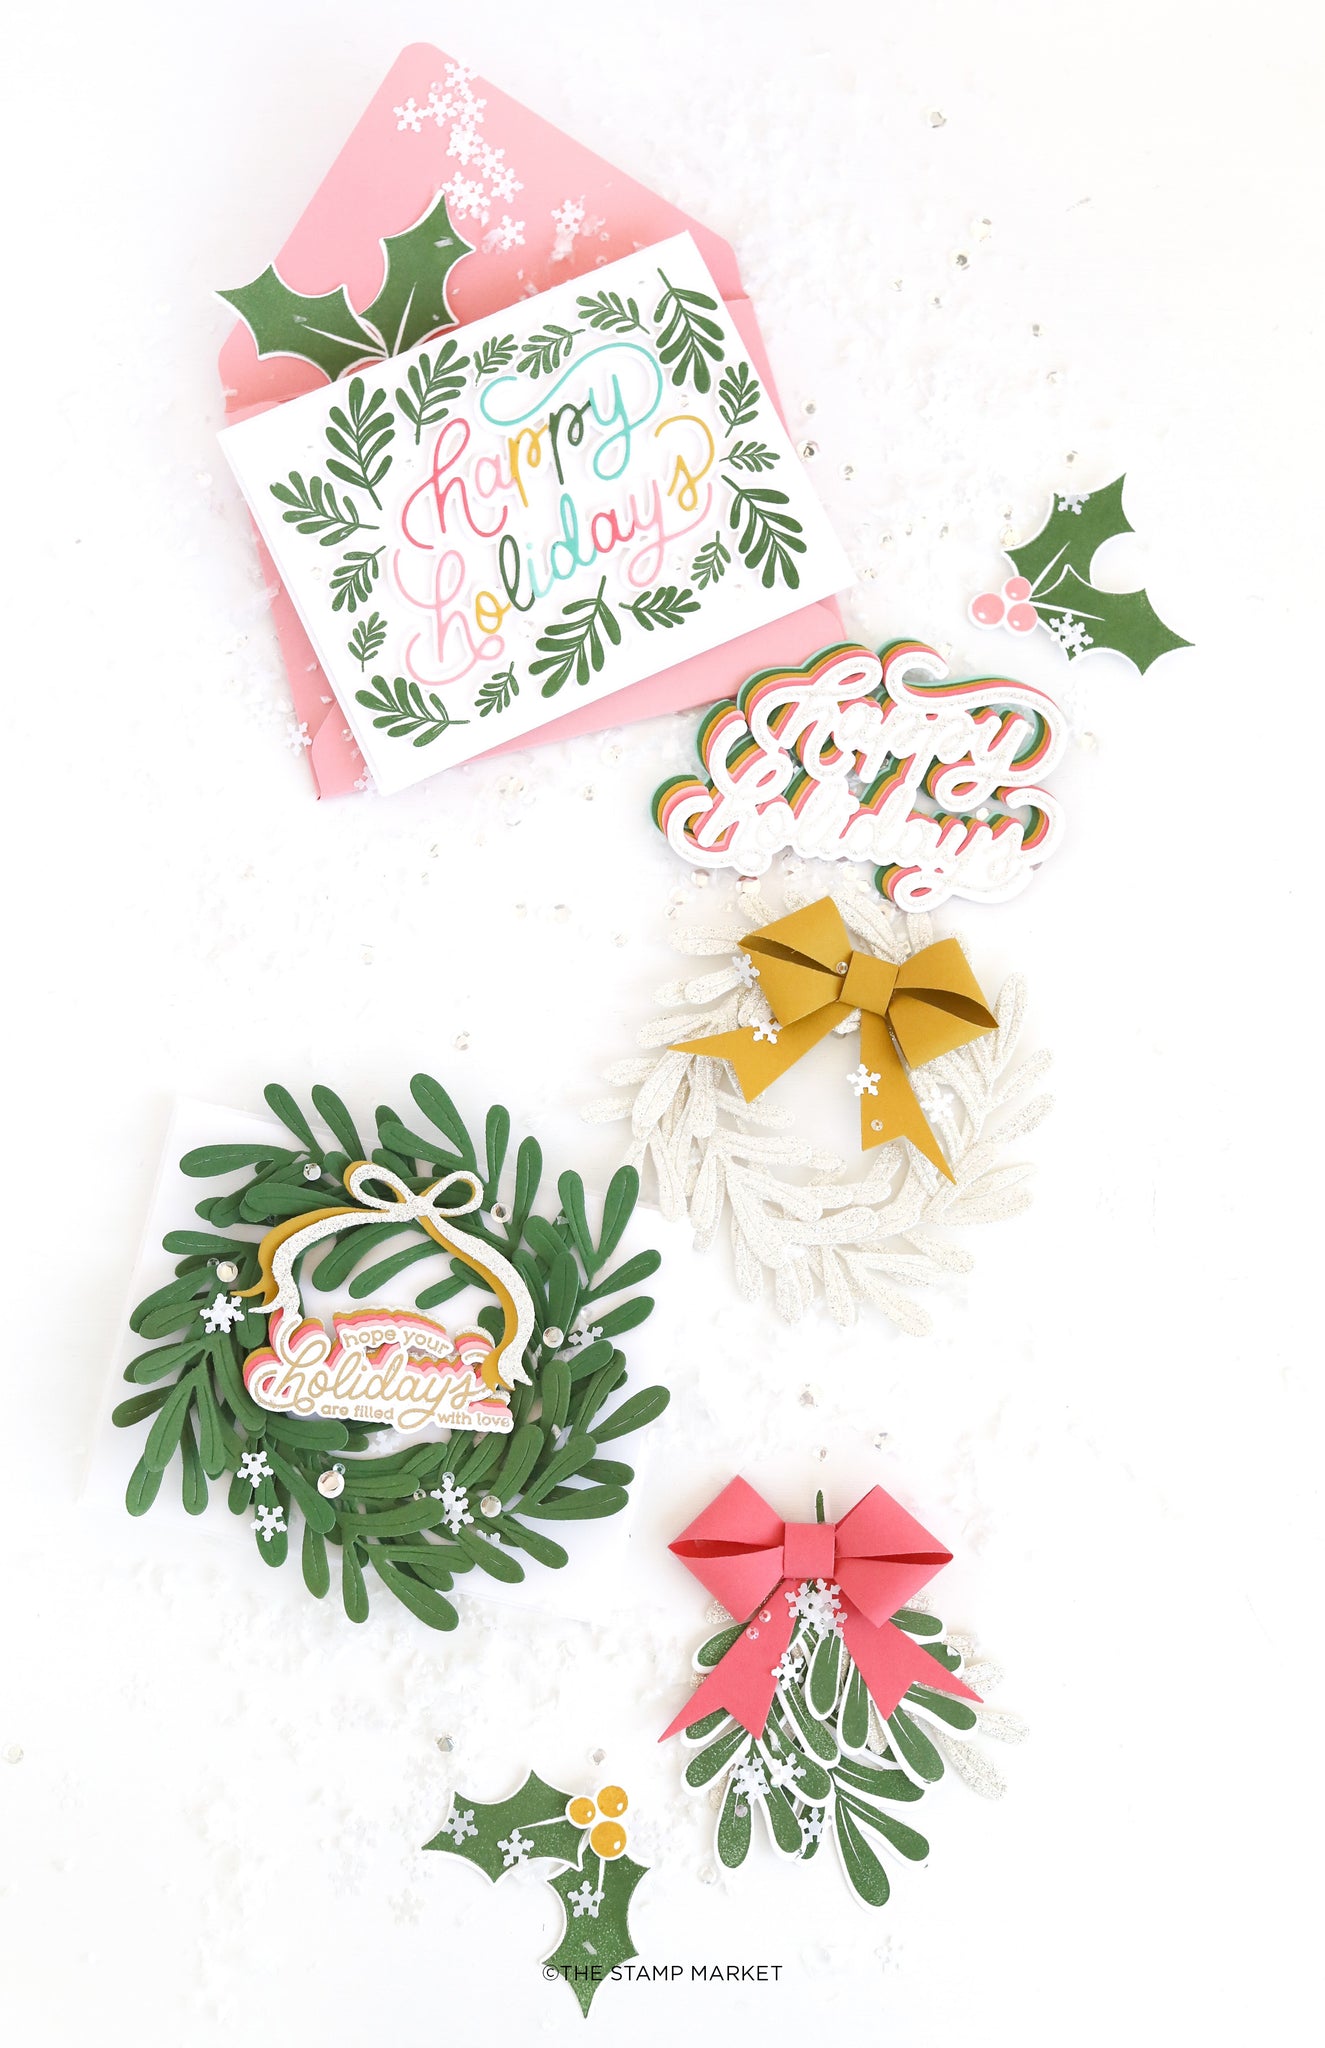 HAPPY HOLIDAYS CLOSEUP – The Stamp Market